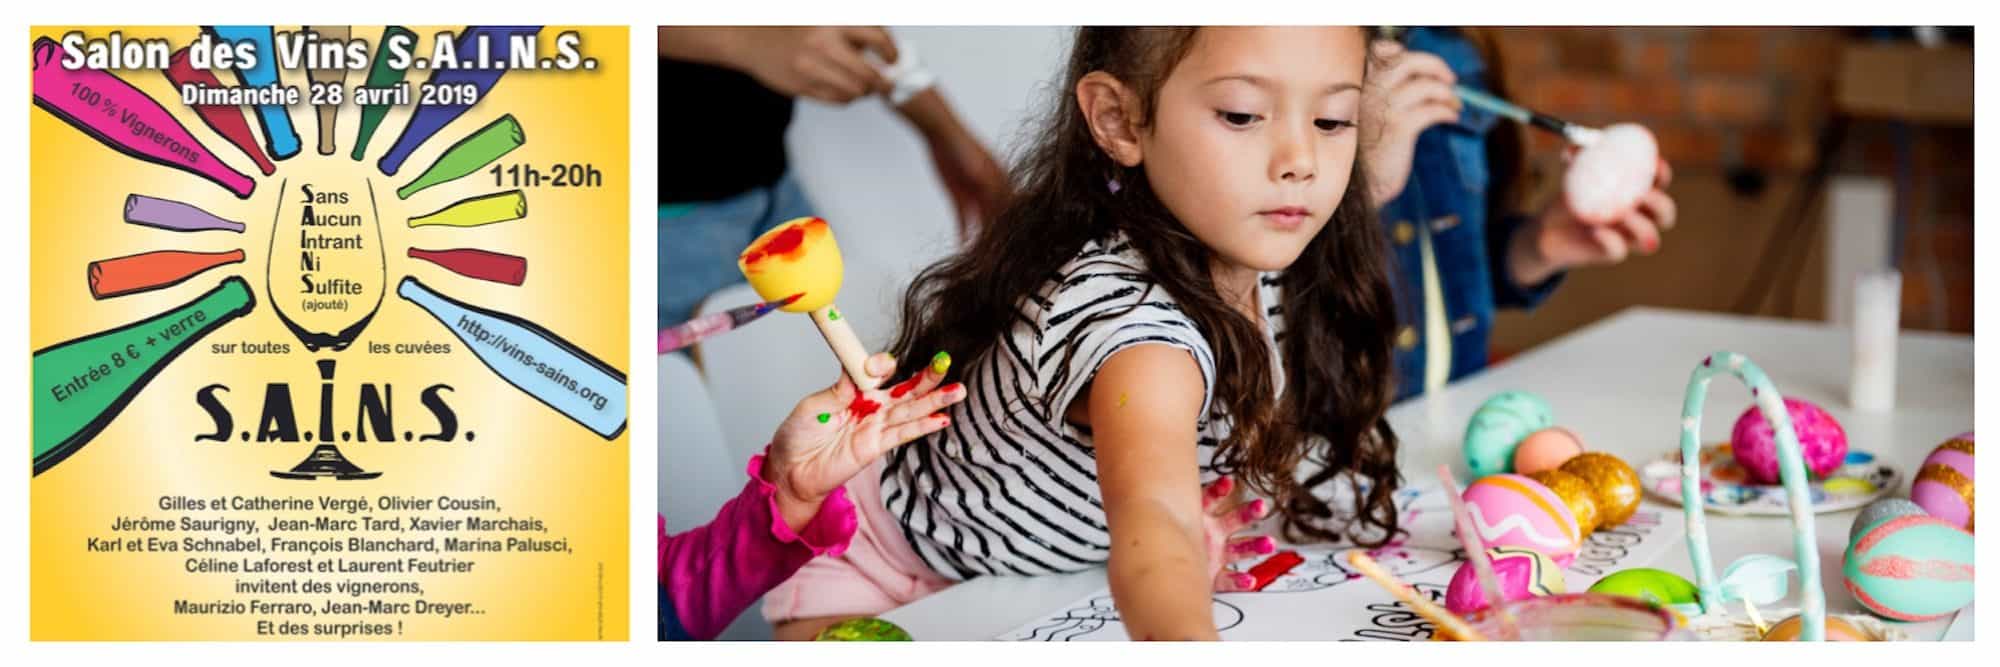 A poster for wine-tasting collective Les Vins S.A.I.N.S. in Paris this April (left). A little girl painting Easter eggs in Paris this April at one of the city's events for kids (right).